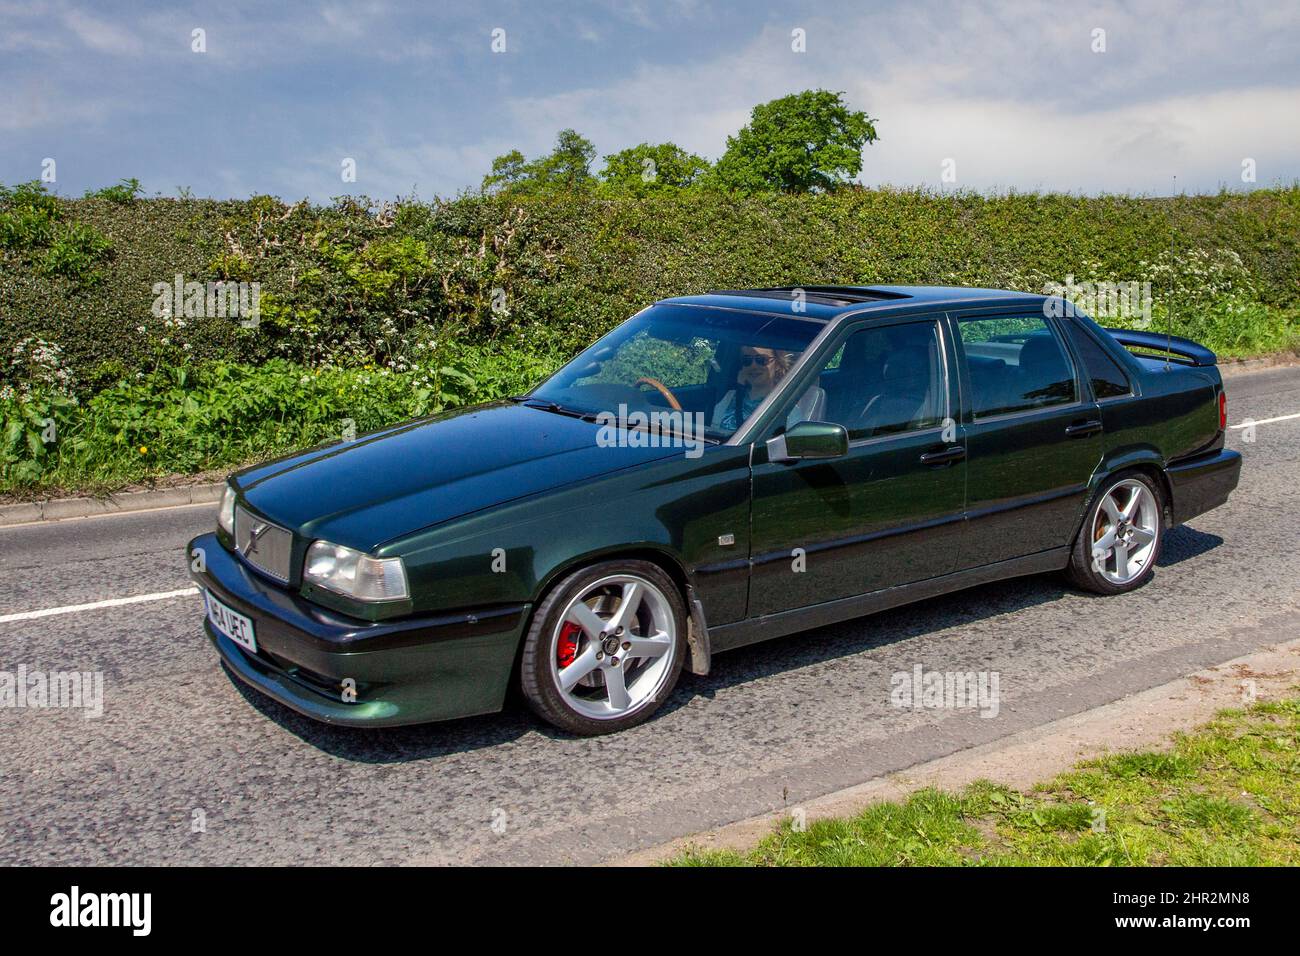 1995 Volvo 800 series 850 GLT 95 2319cc petrol 5 speed manual; en-route to Capesthorne Hall classic May car show, Cheshire, UK Stock Photo